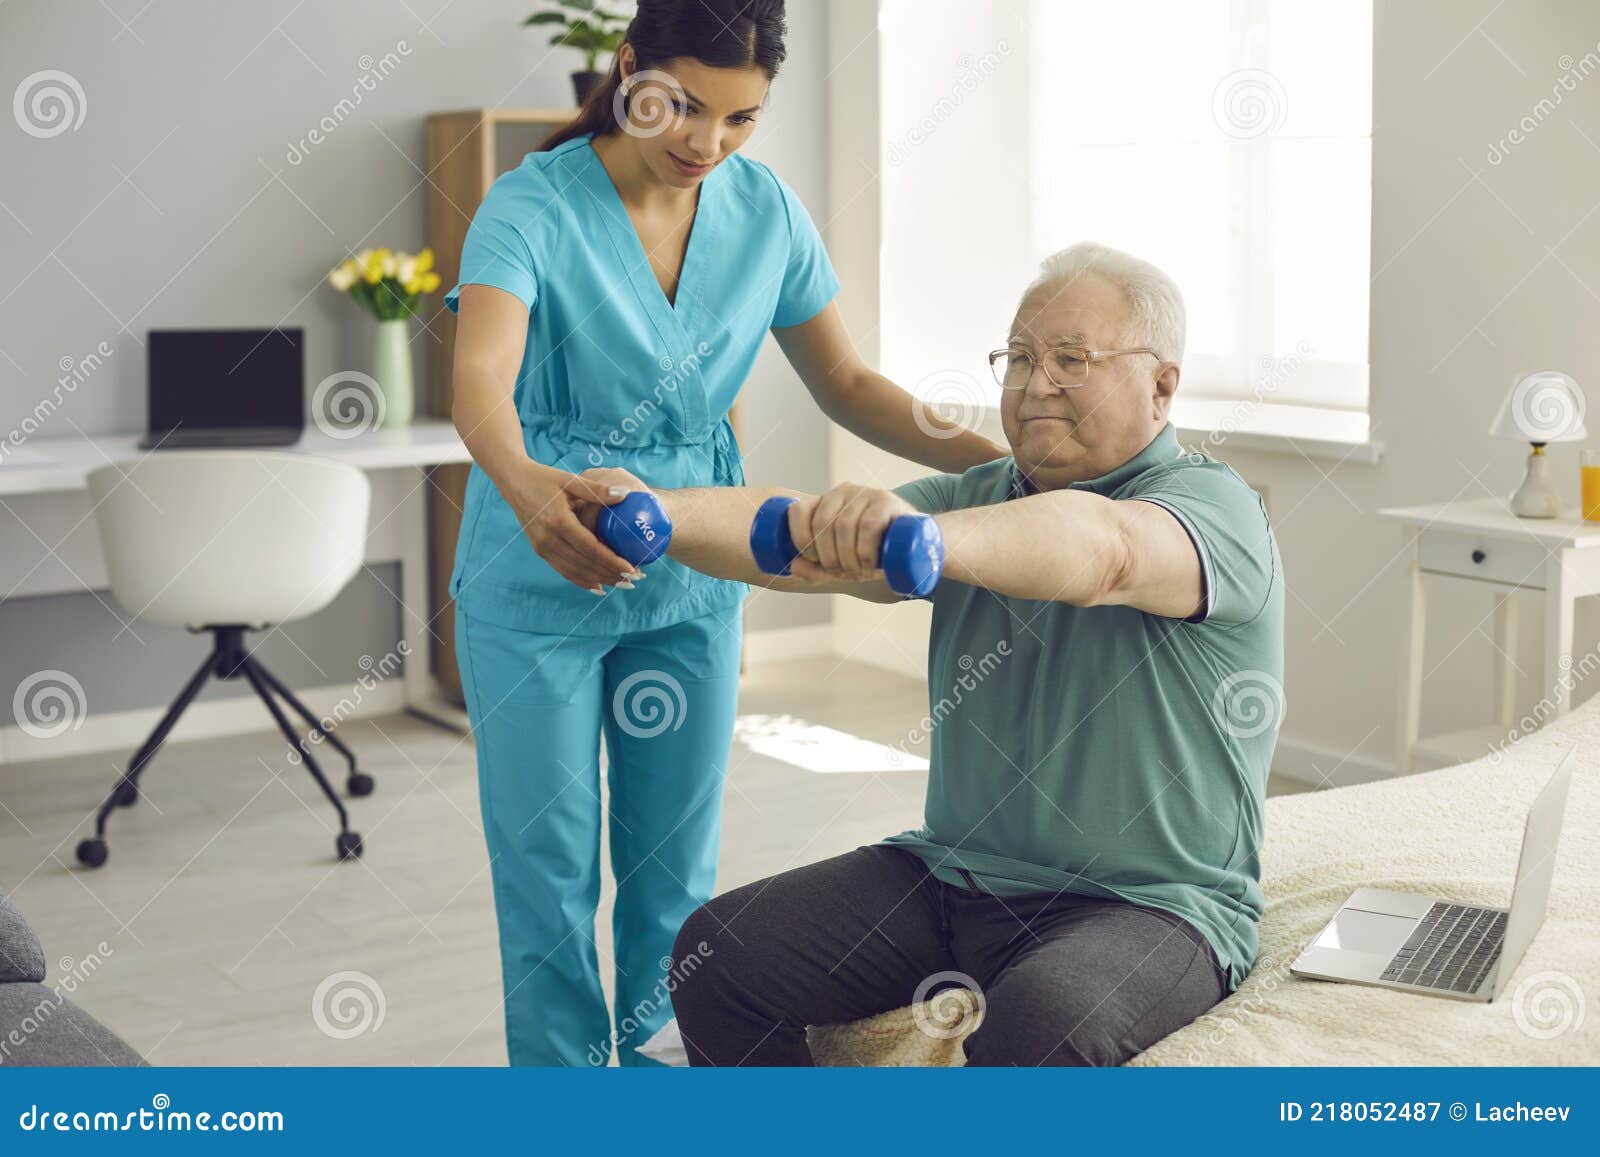 physiotherapist or home care nurse helping senior patient do rehabilitation exercise